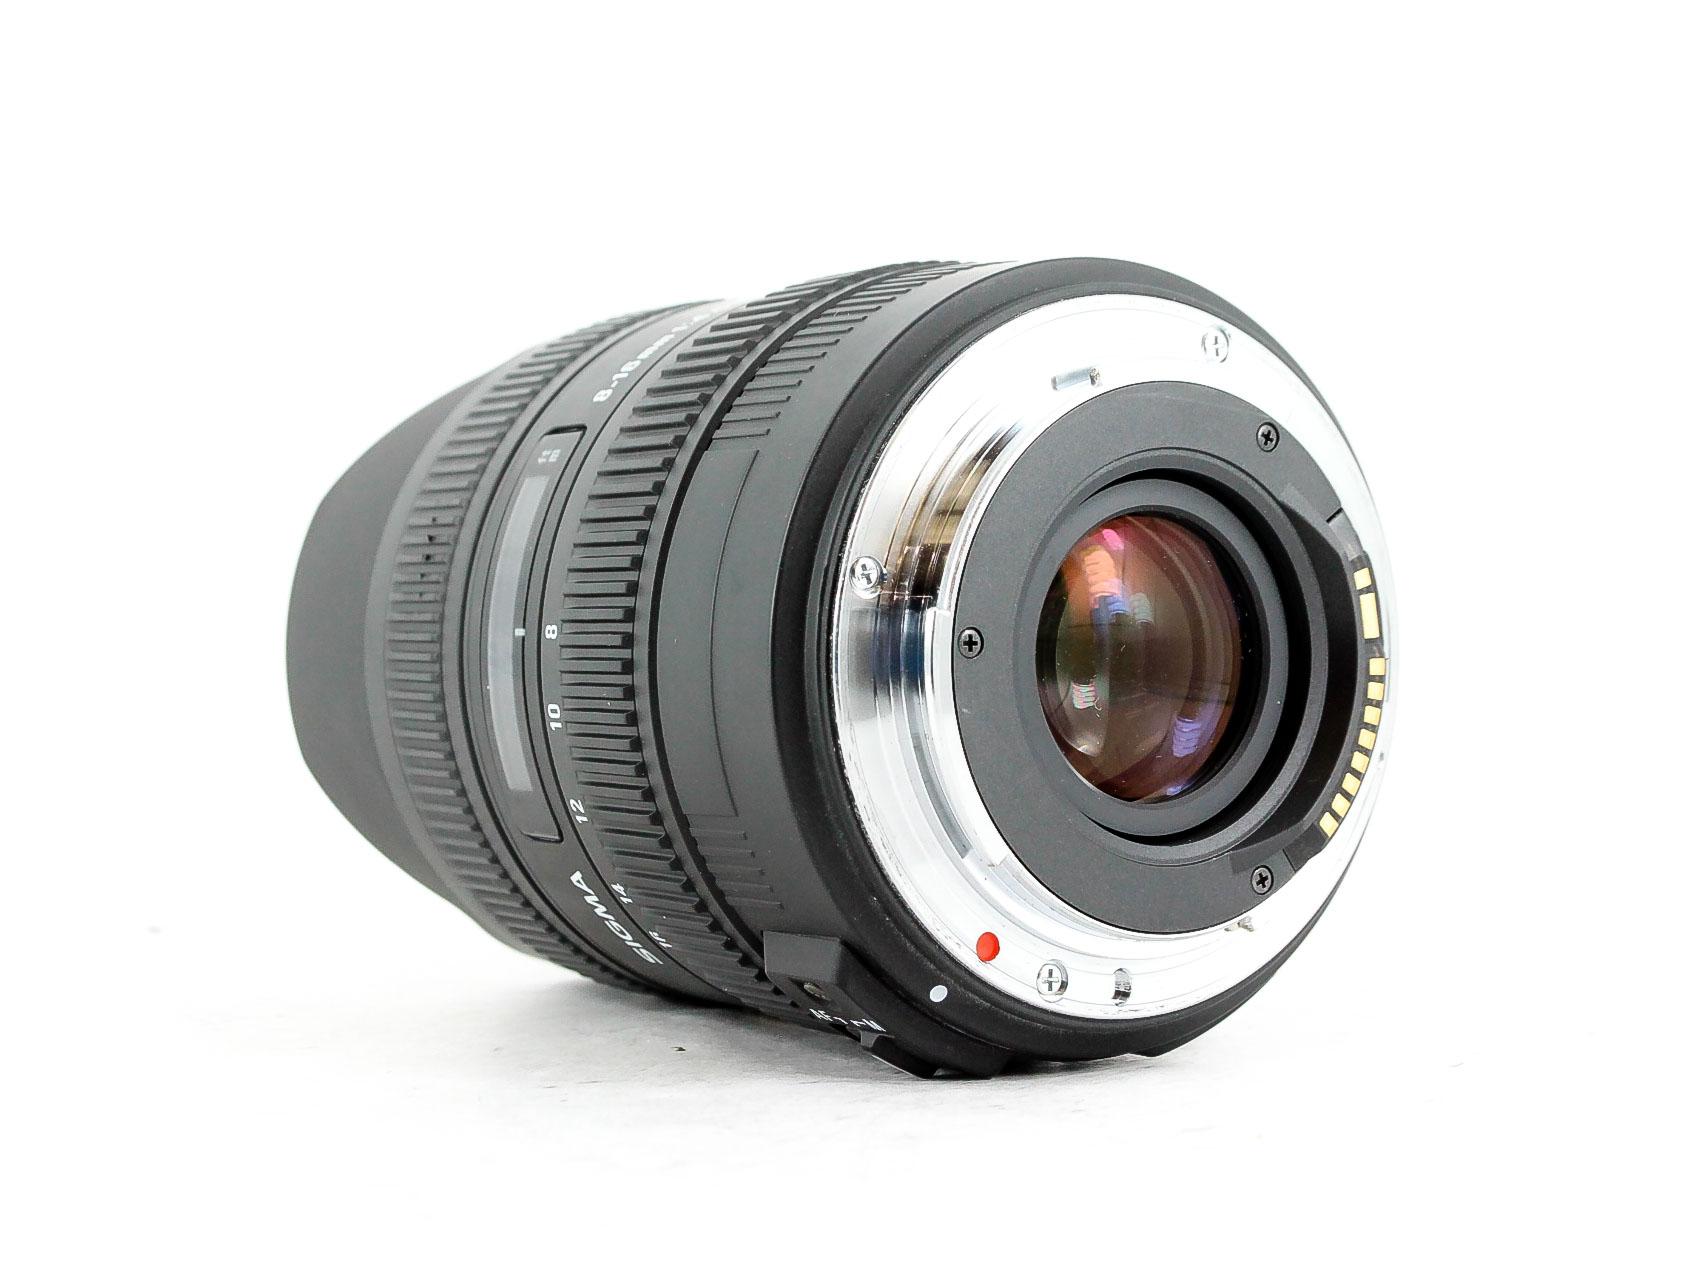 Sigma 8-16mm f/4.5-5.6 DC HSM, Canon EF-S Fit Lens - Lenses and